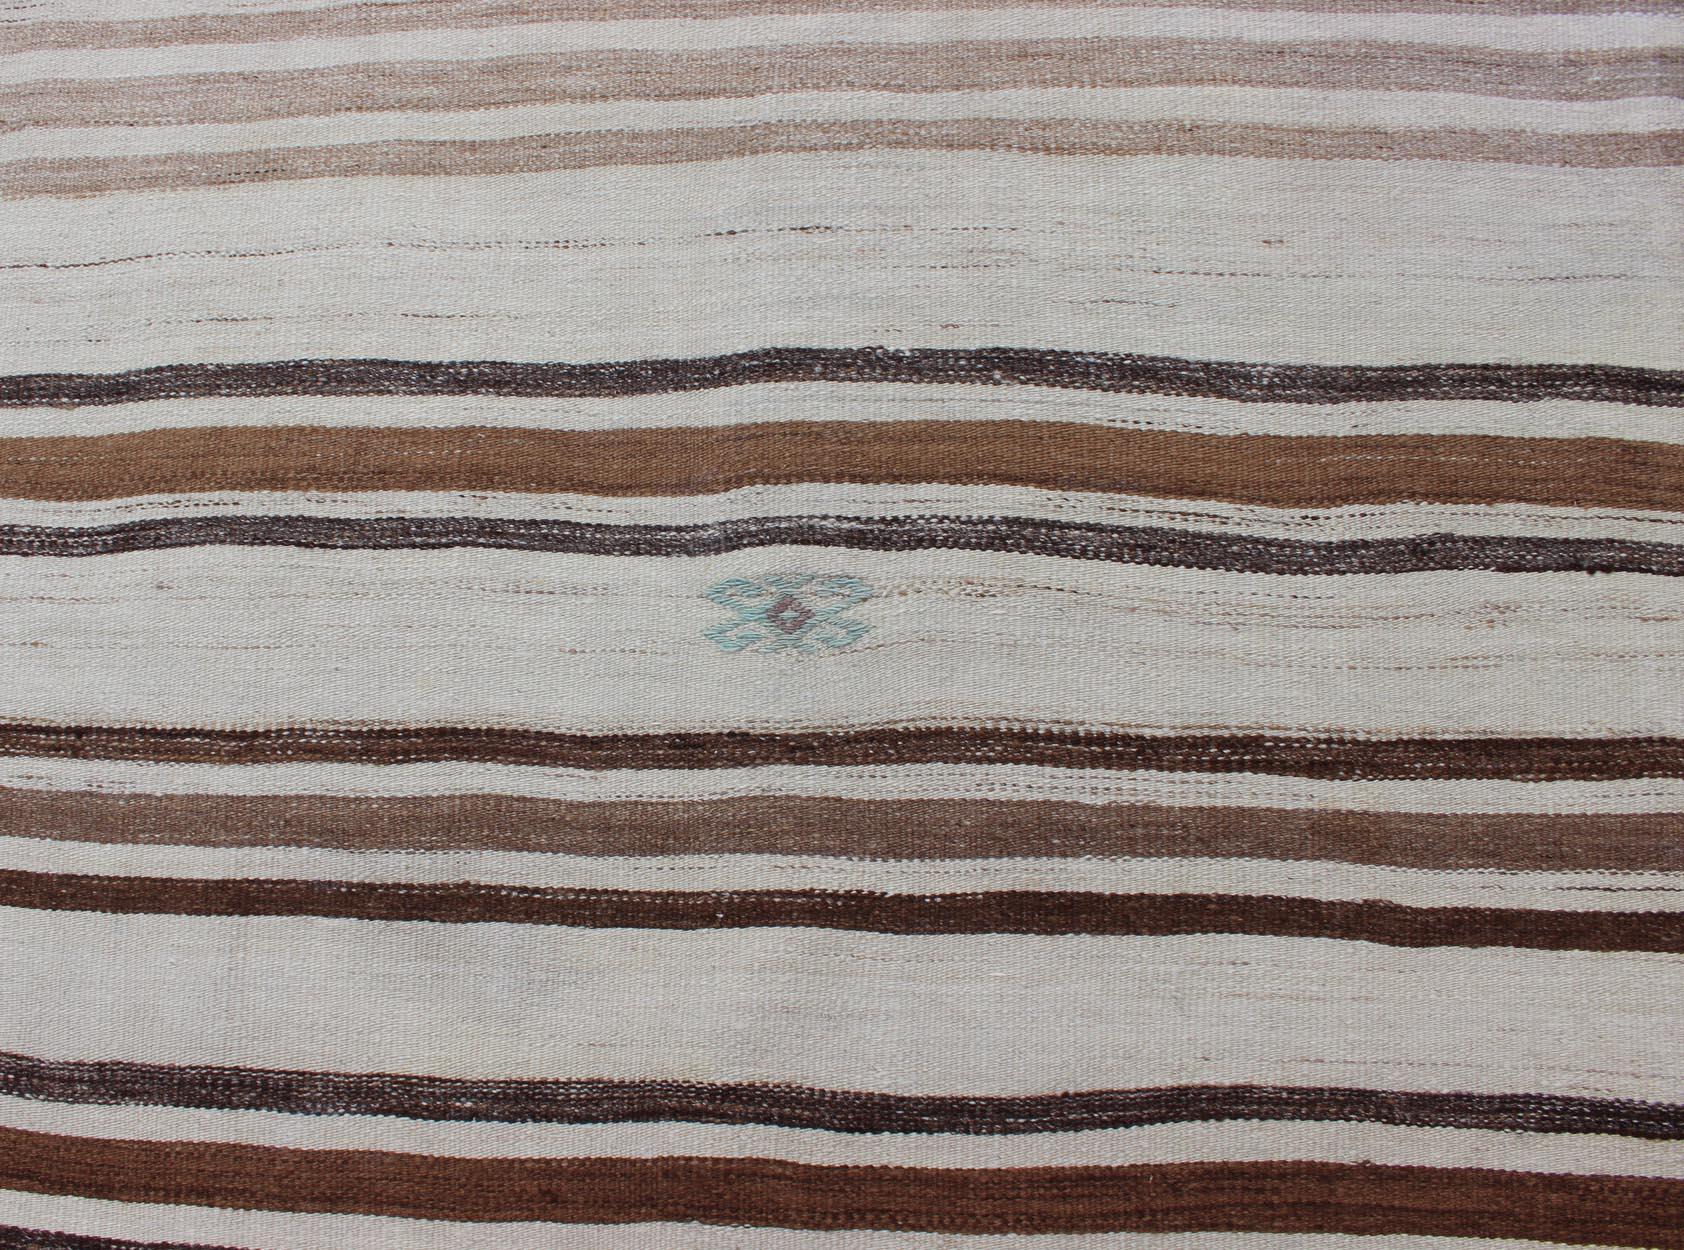 Striped Turkish Vintage Kilim Flat-Weave Rug in Shades of Browns Taupe and Ivory For Sale 4